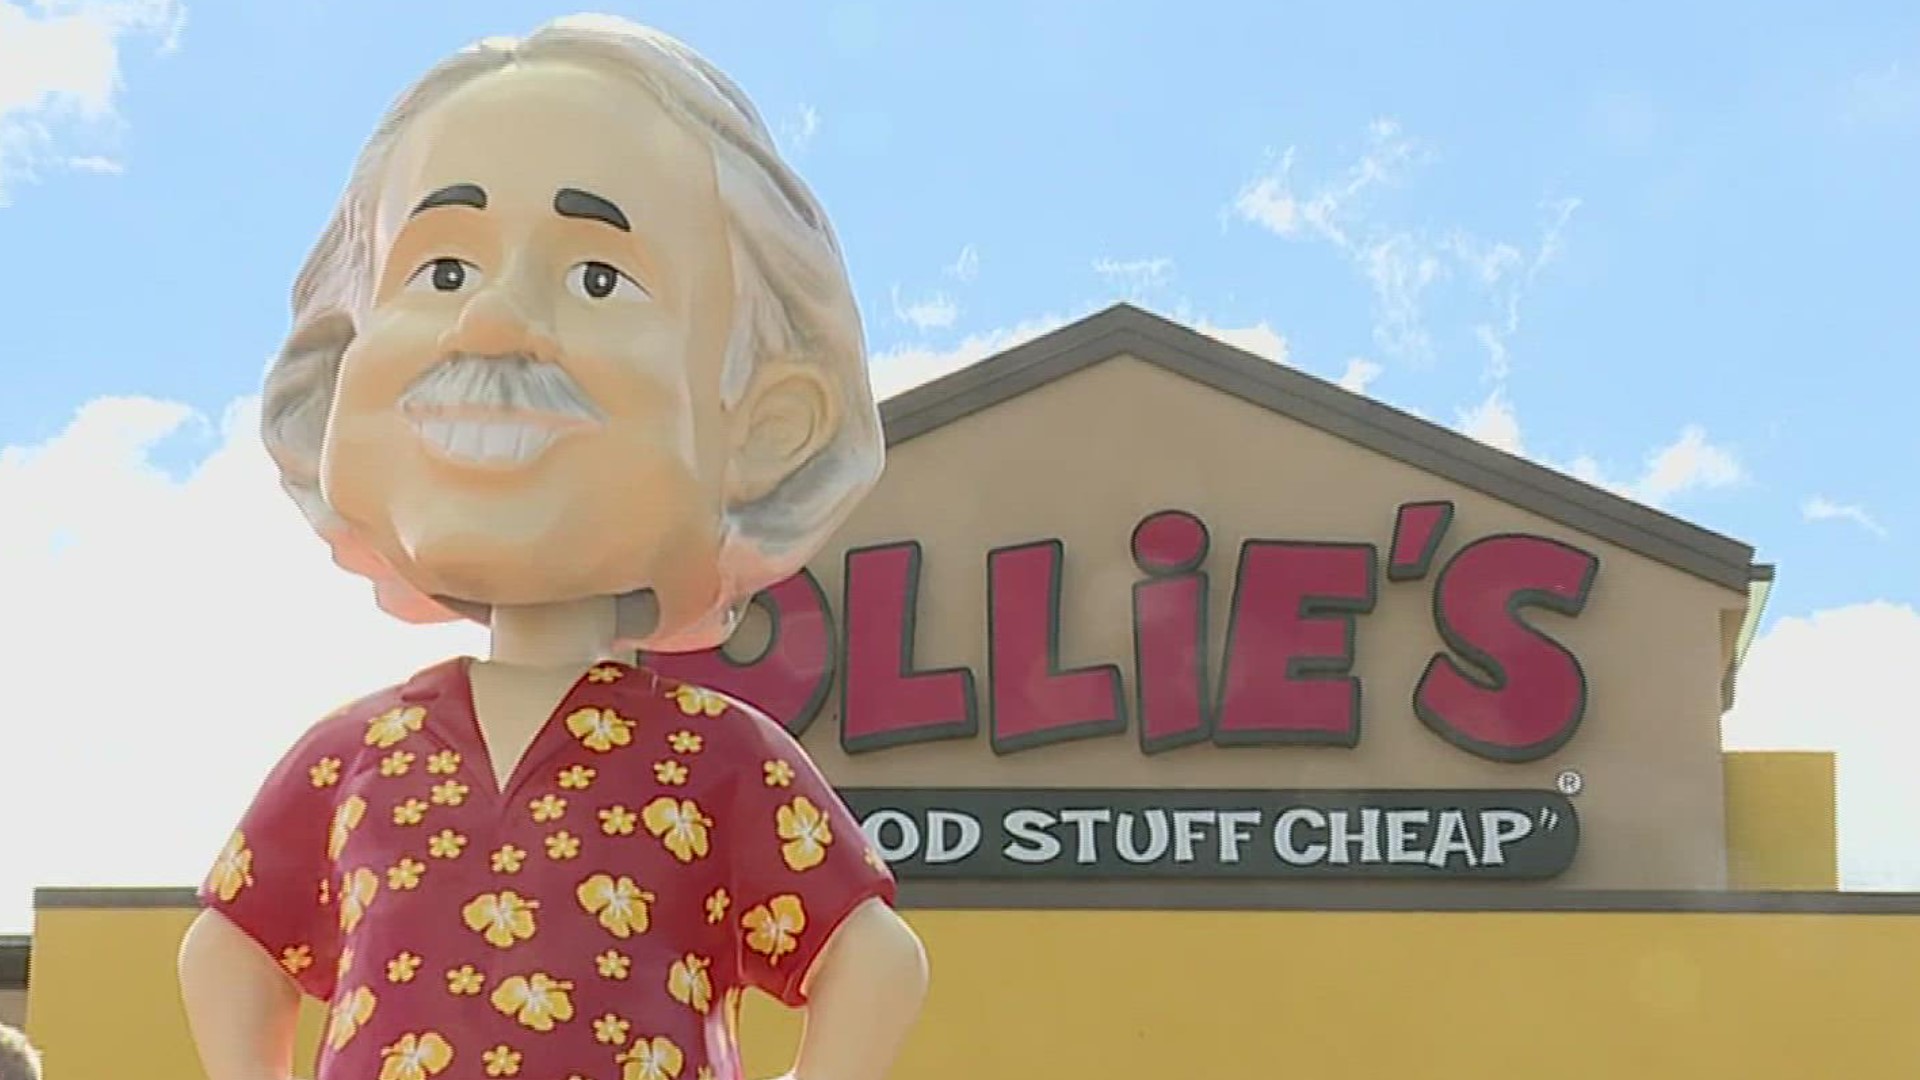 The popular retailer of closeout merchandise built a 16-foot, fully functioning bobblehead of the store's mascot, Ollie!